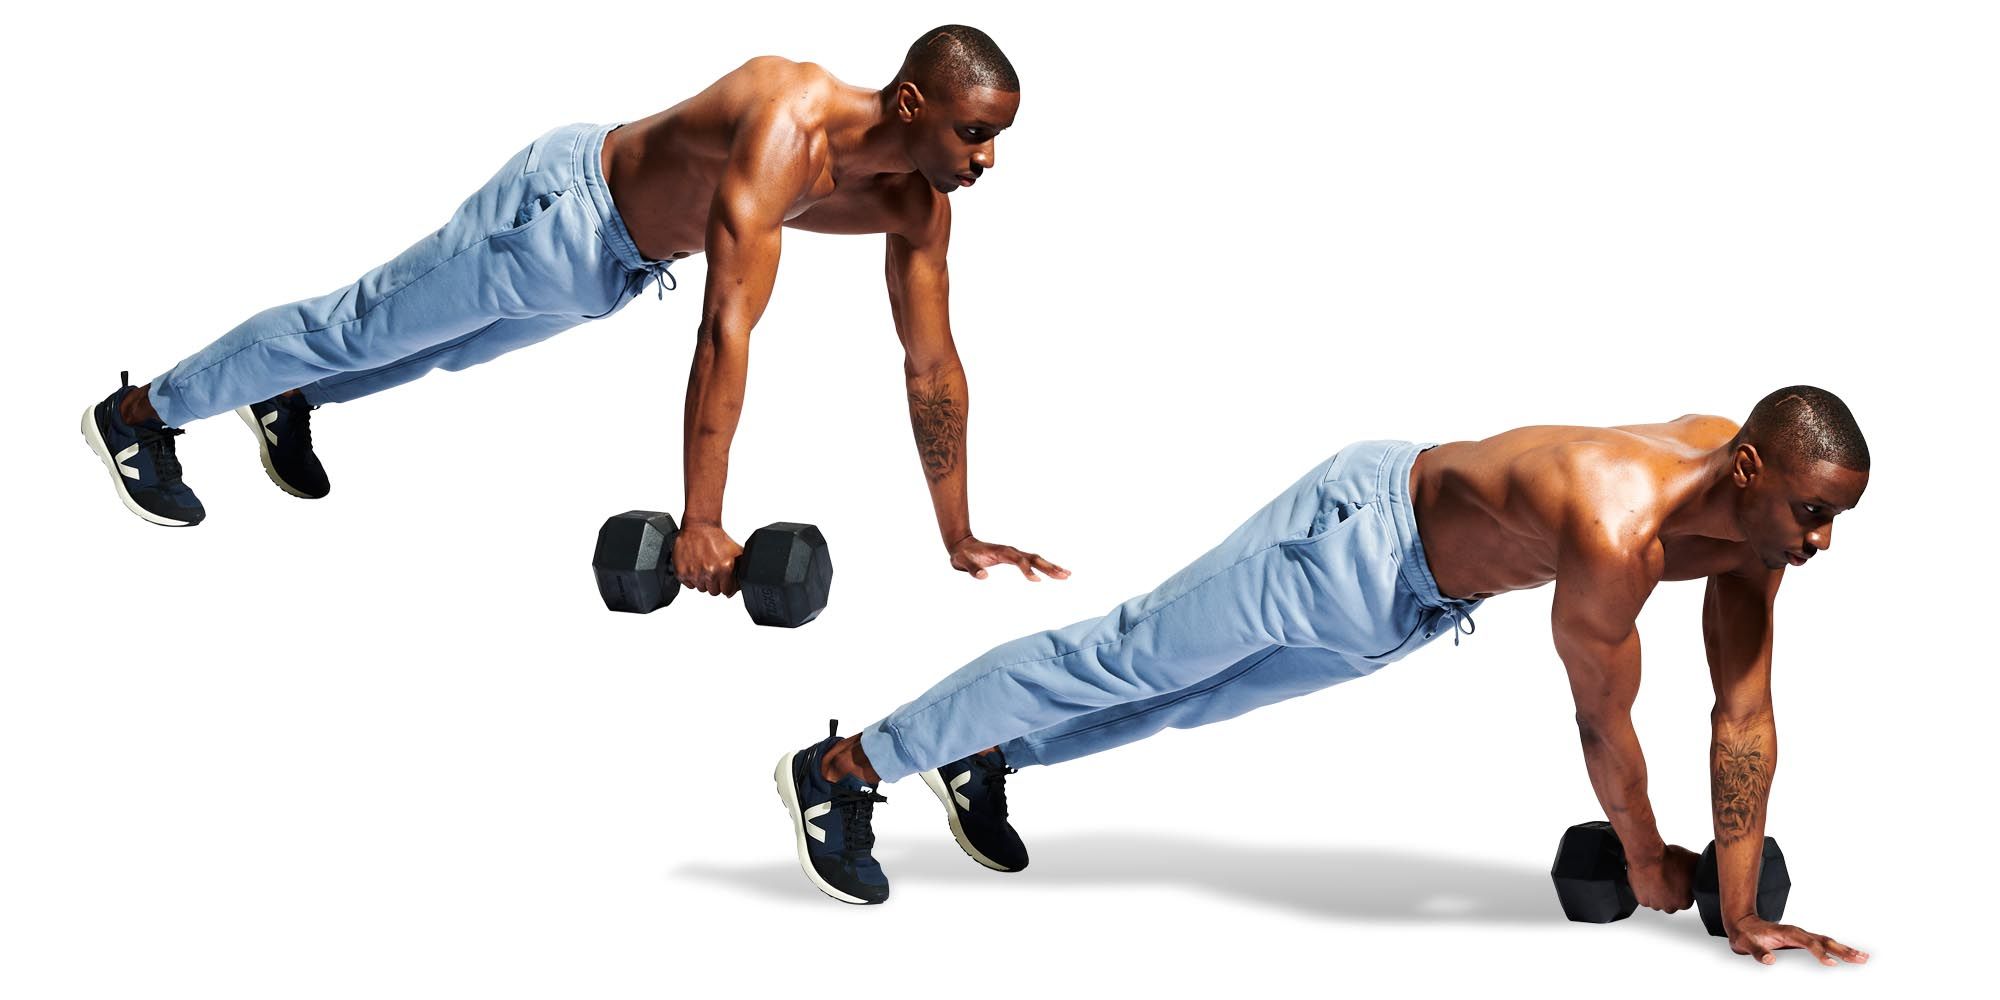 4 Brutal Exercises That Build Extreme Core Strength